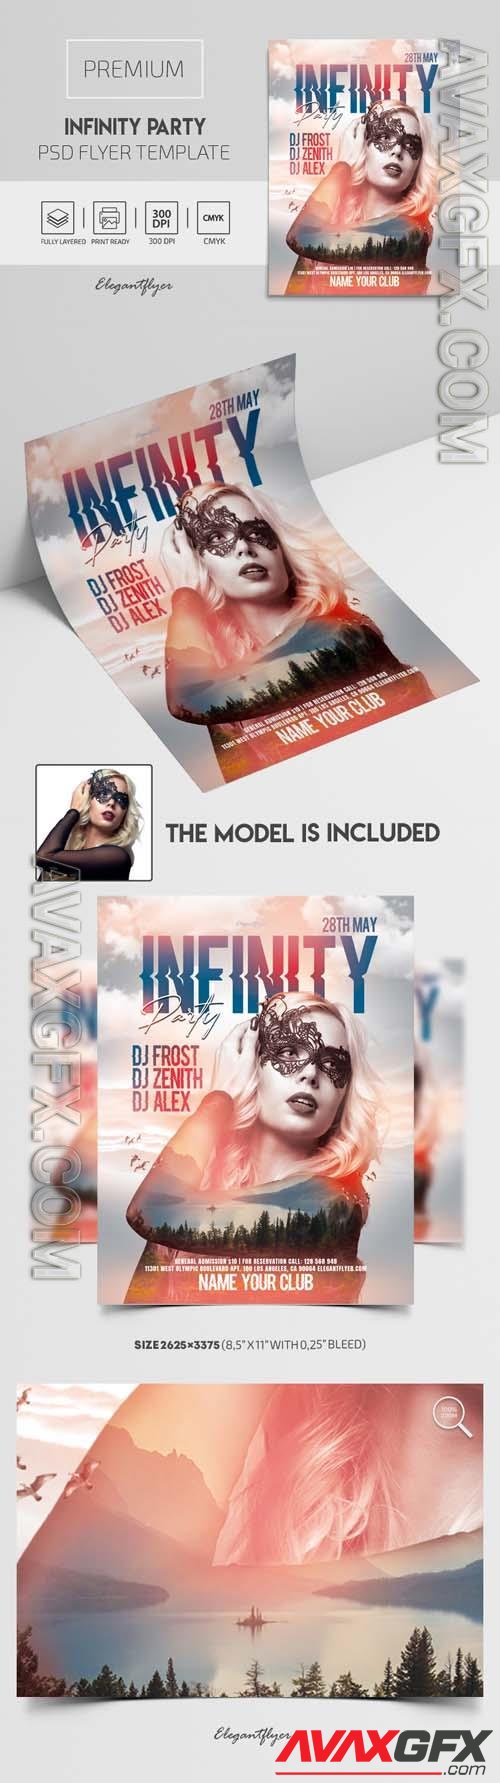 Infinity Party Flyer PSD Template